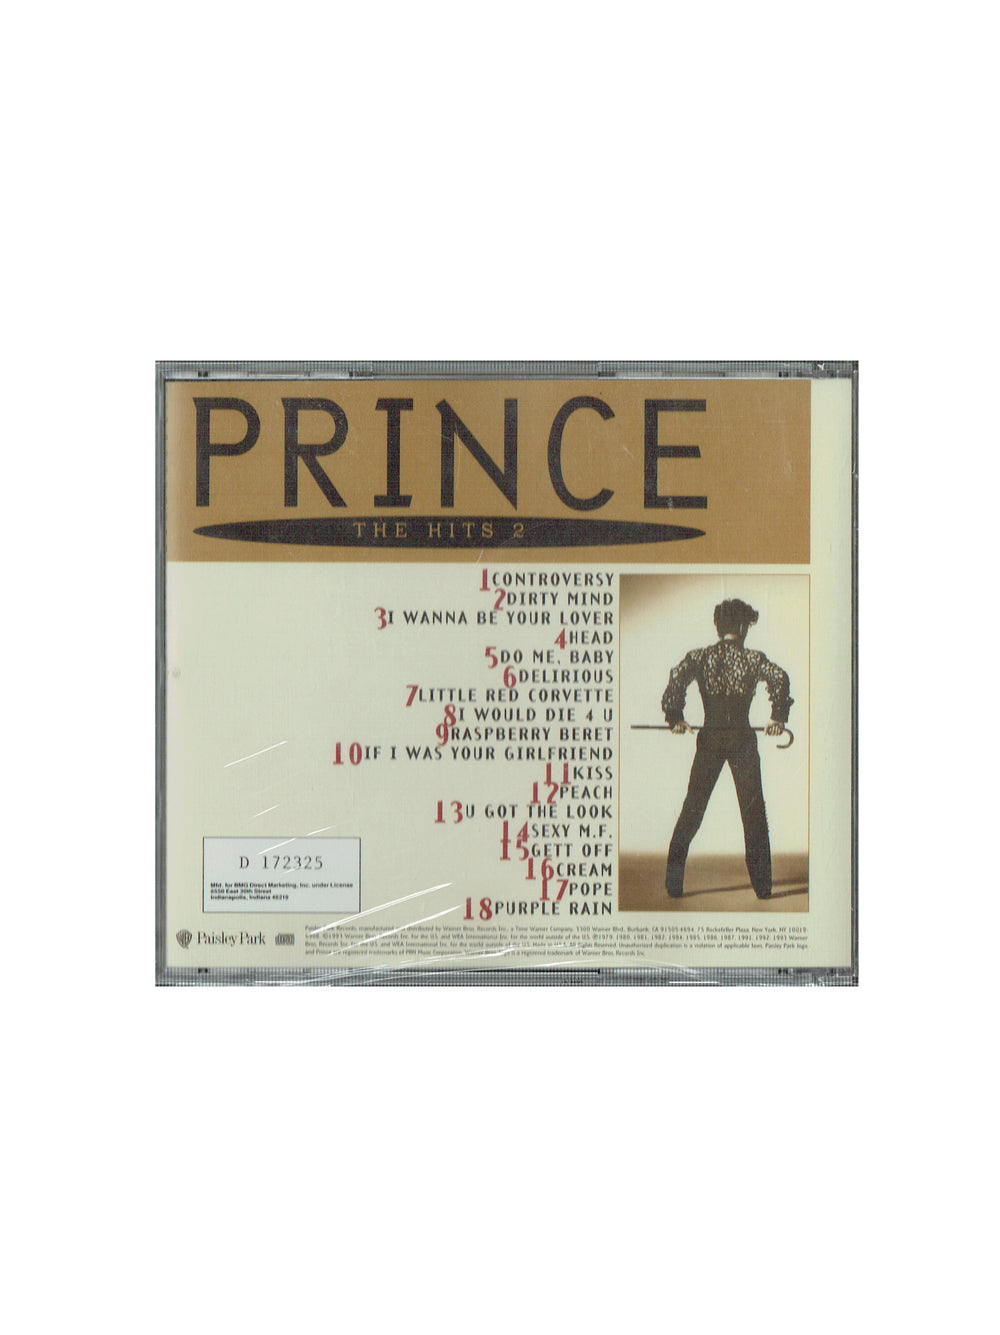 Prince –  The Hits 2 CD Album 1993 Original Release 18 Tracks WITH HYPE